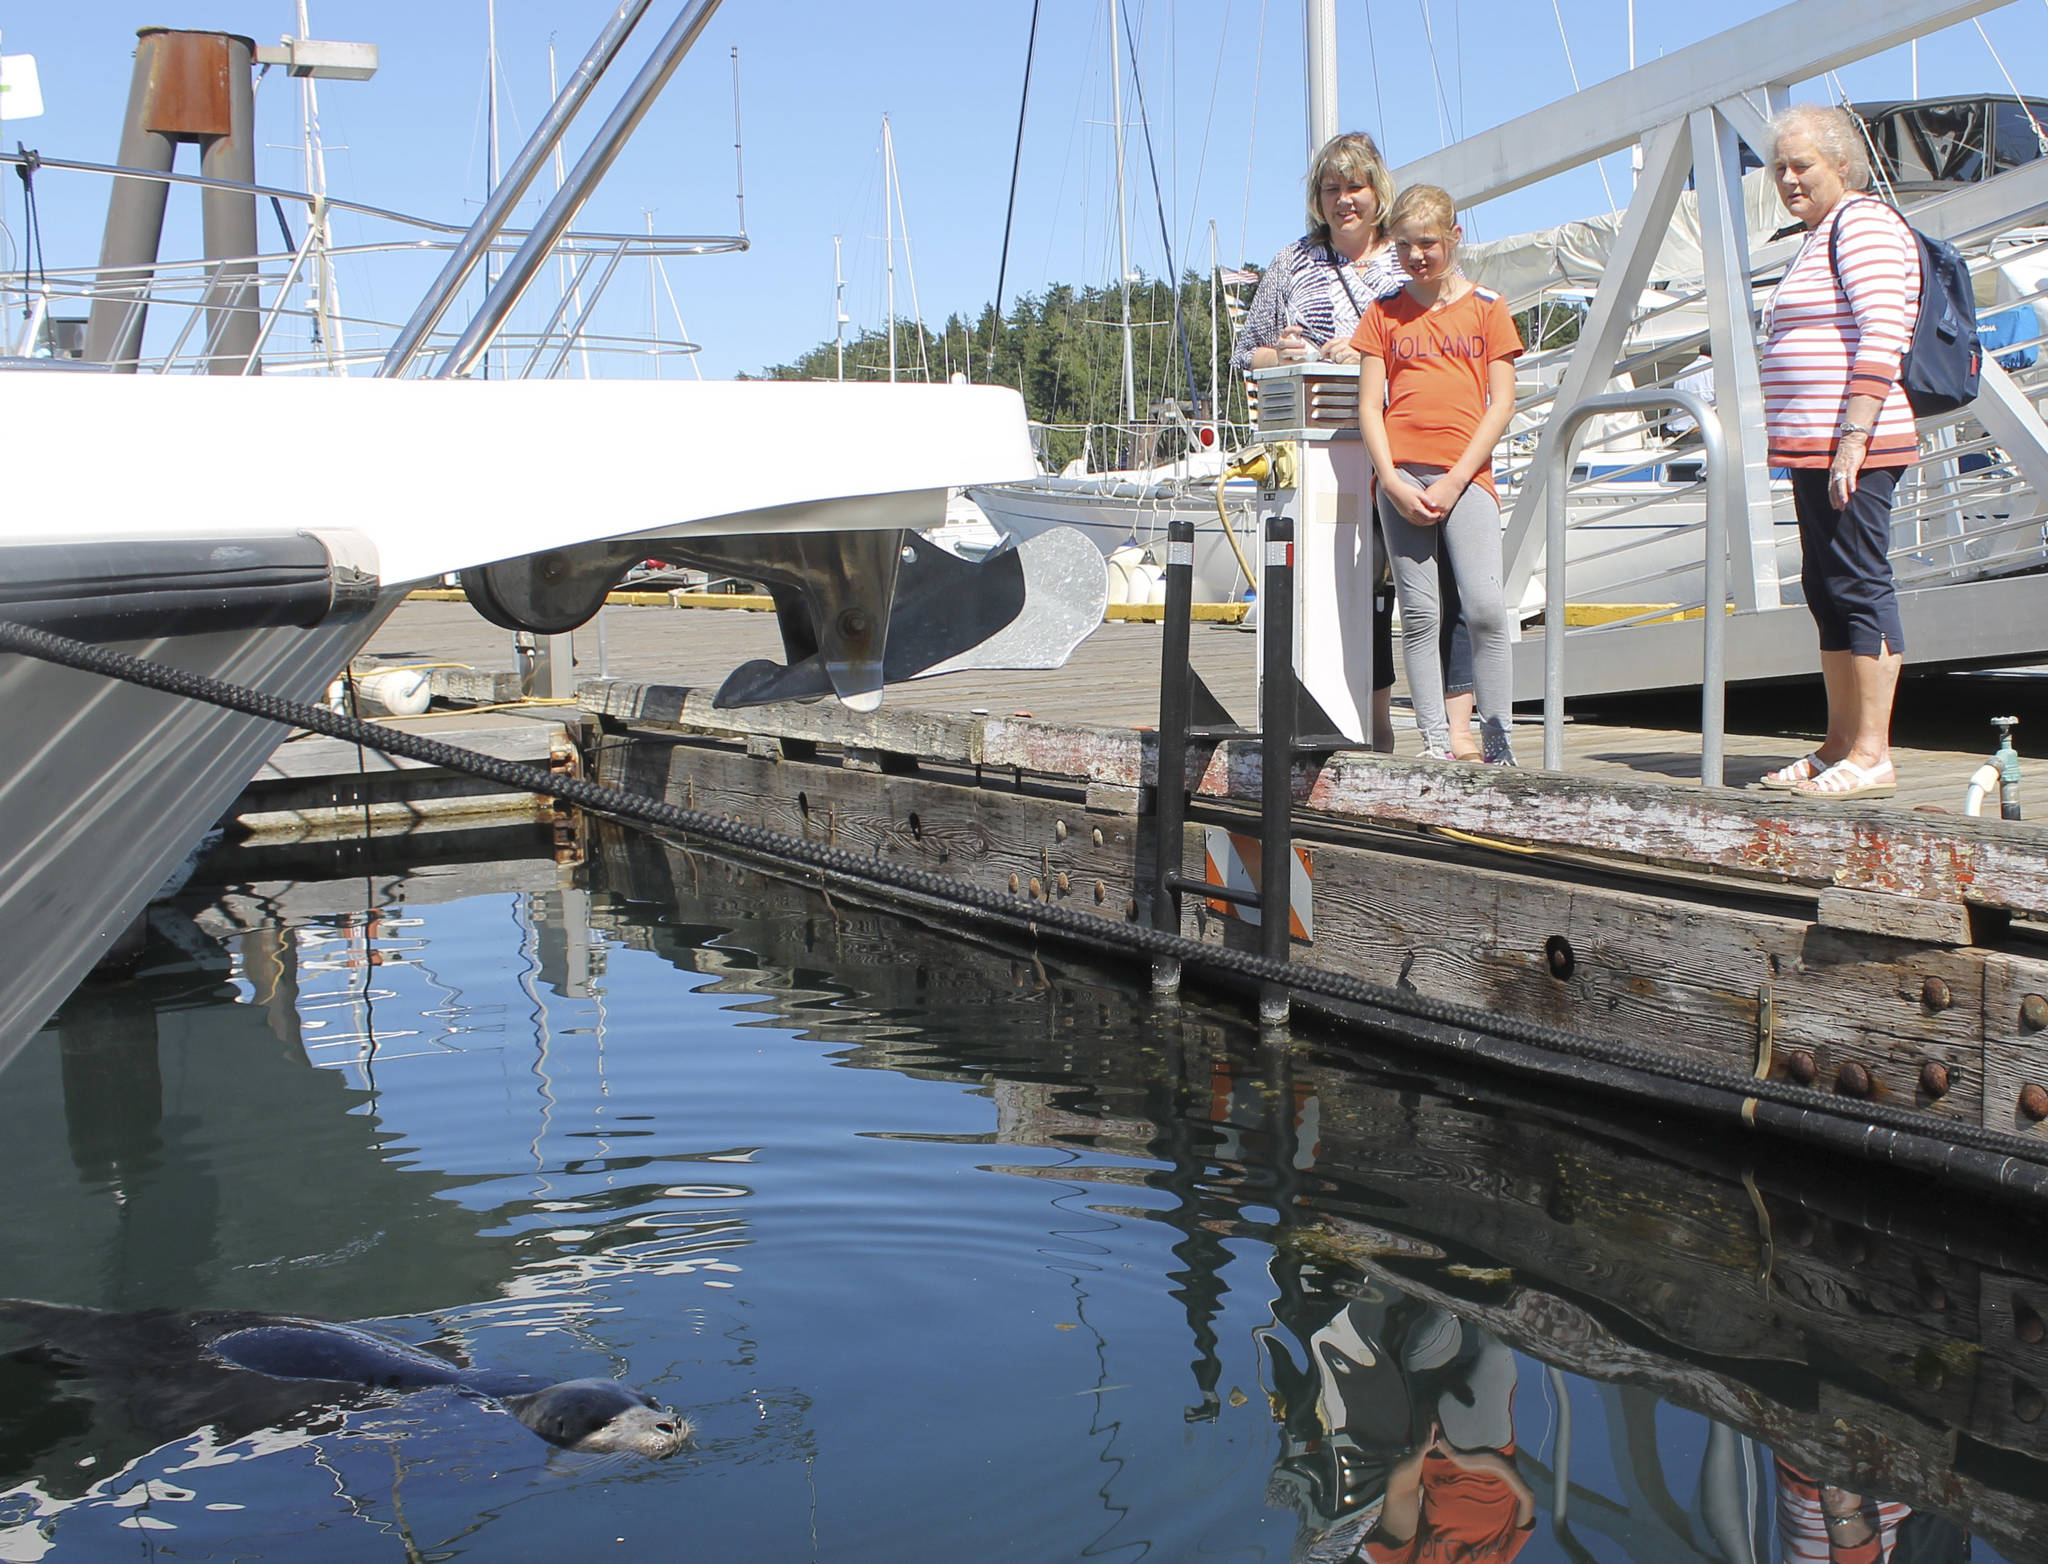 Staff photo/Hayley Day                                Popeye often draws a crowd when swimming at the Port of Friday Harbor.